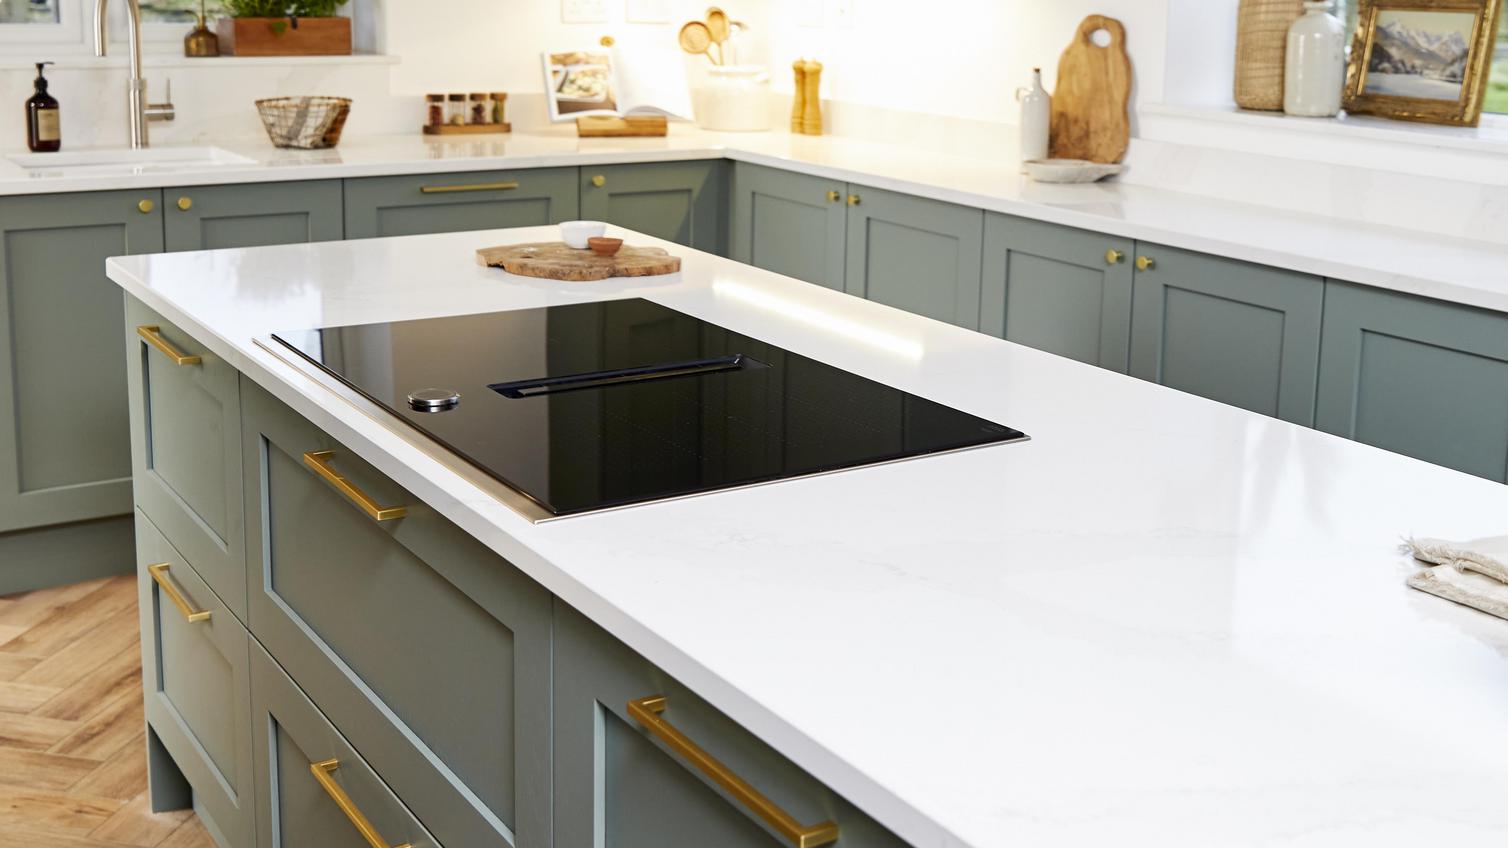 Sage green shaker kitchen in an island layout with brass bar handles, white worktops, and an induction hob.